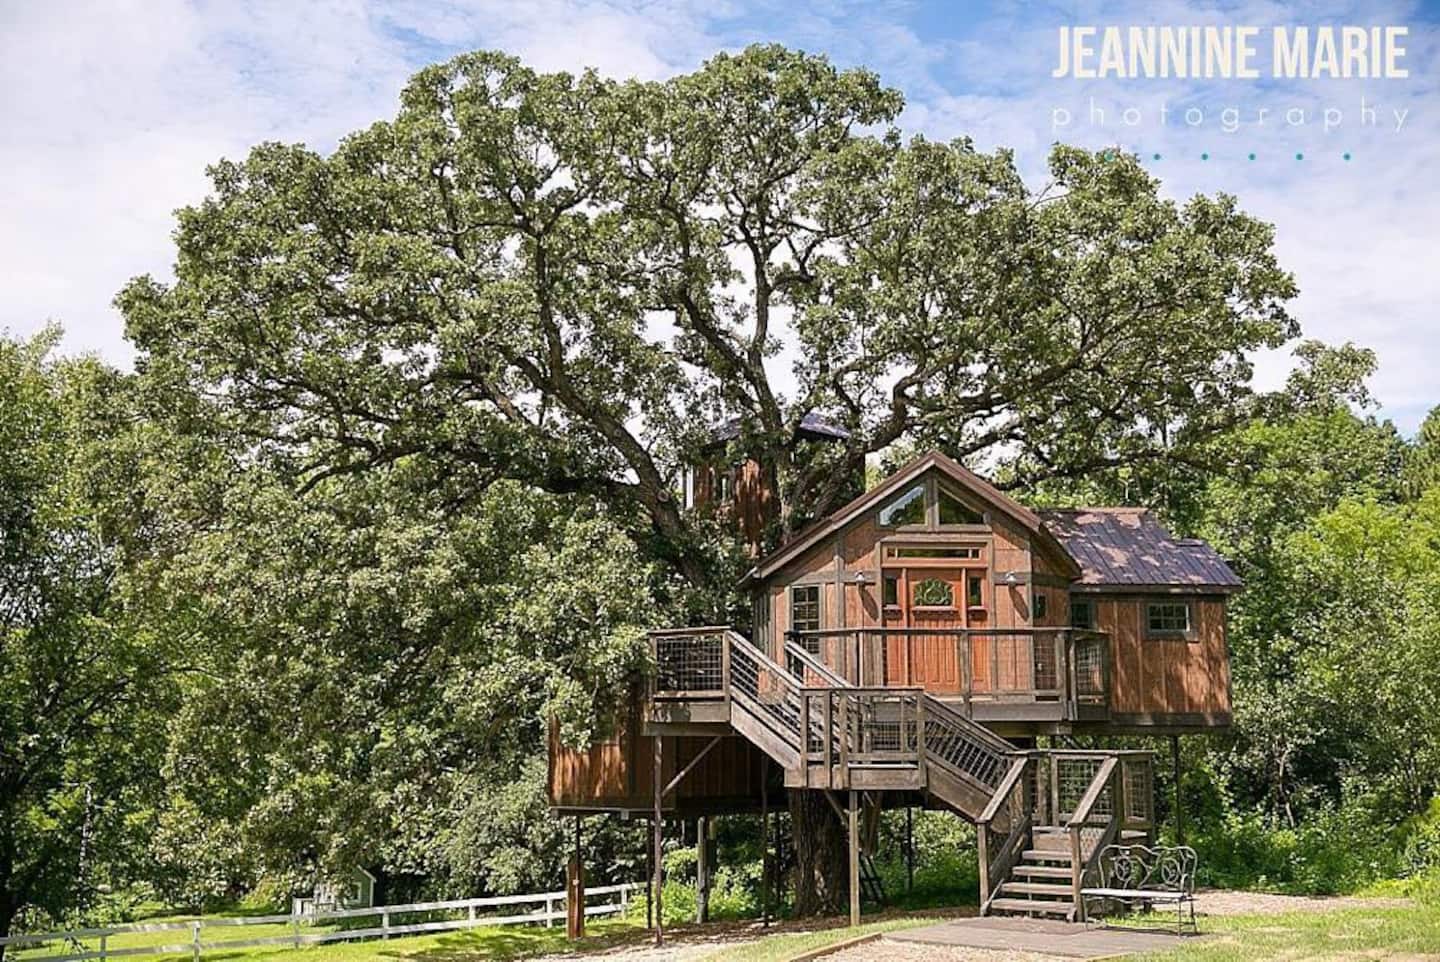 Bright sunny day showcasing a huge wooden treehouse surrounded by huge green trees.